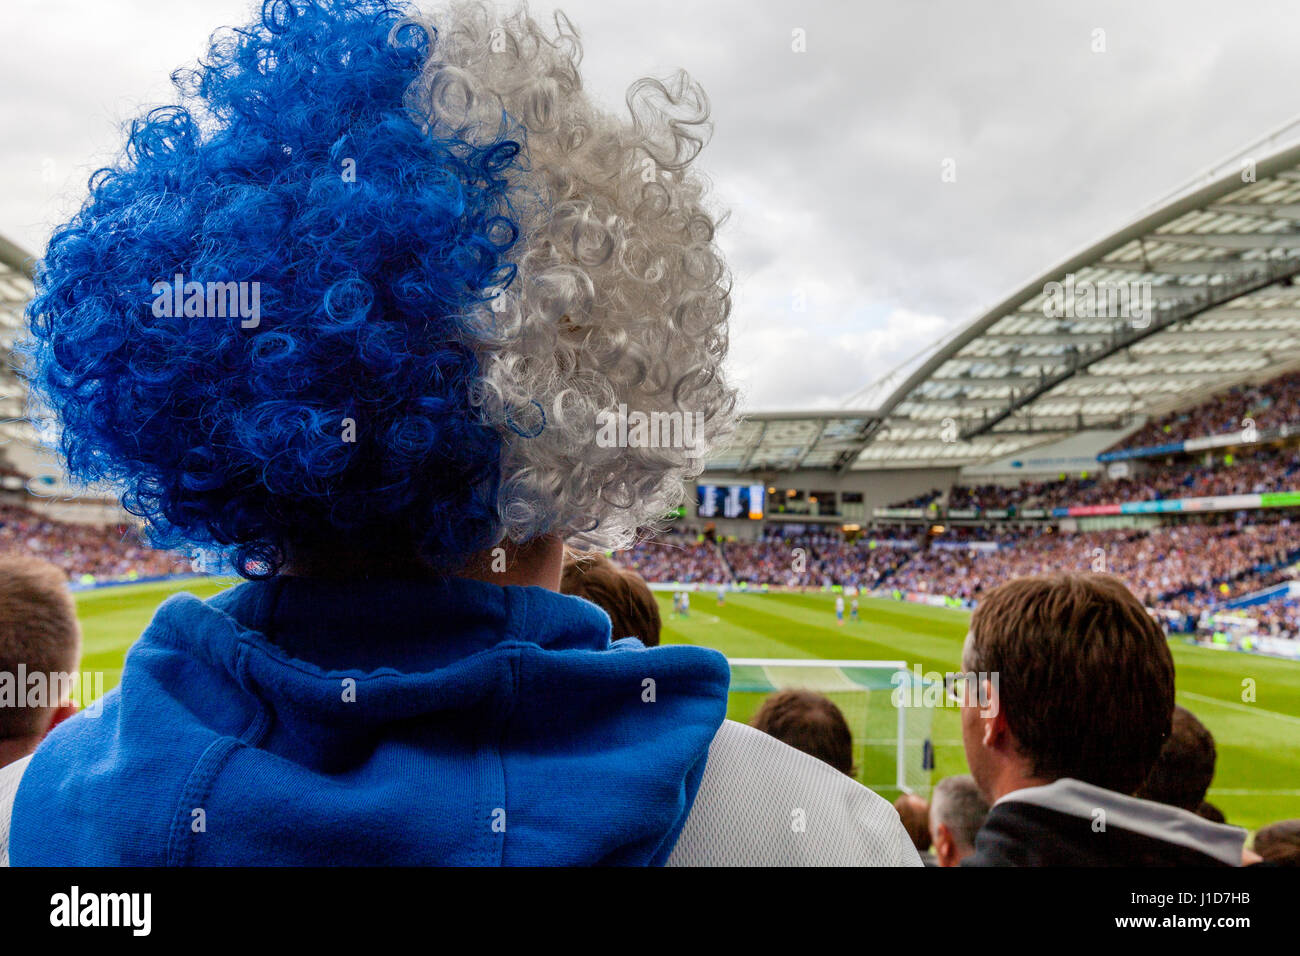 Brighton and Hove Albion Supporters Watch Their Team Play At Home At The Amex Stadium, Brighton, Sussex, UK Stock Photo